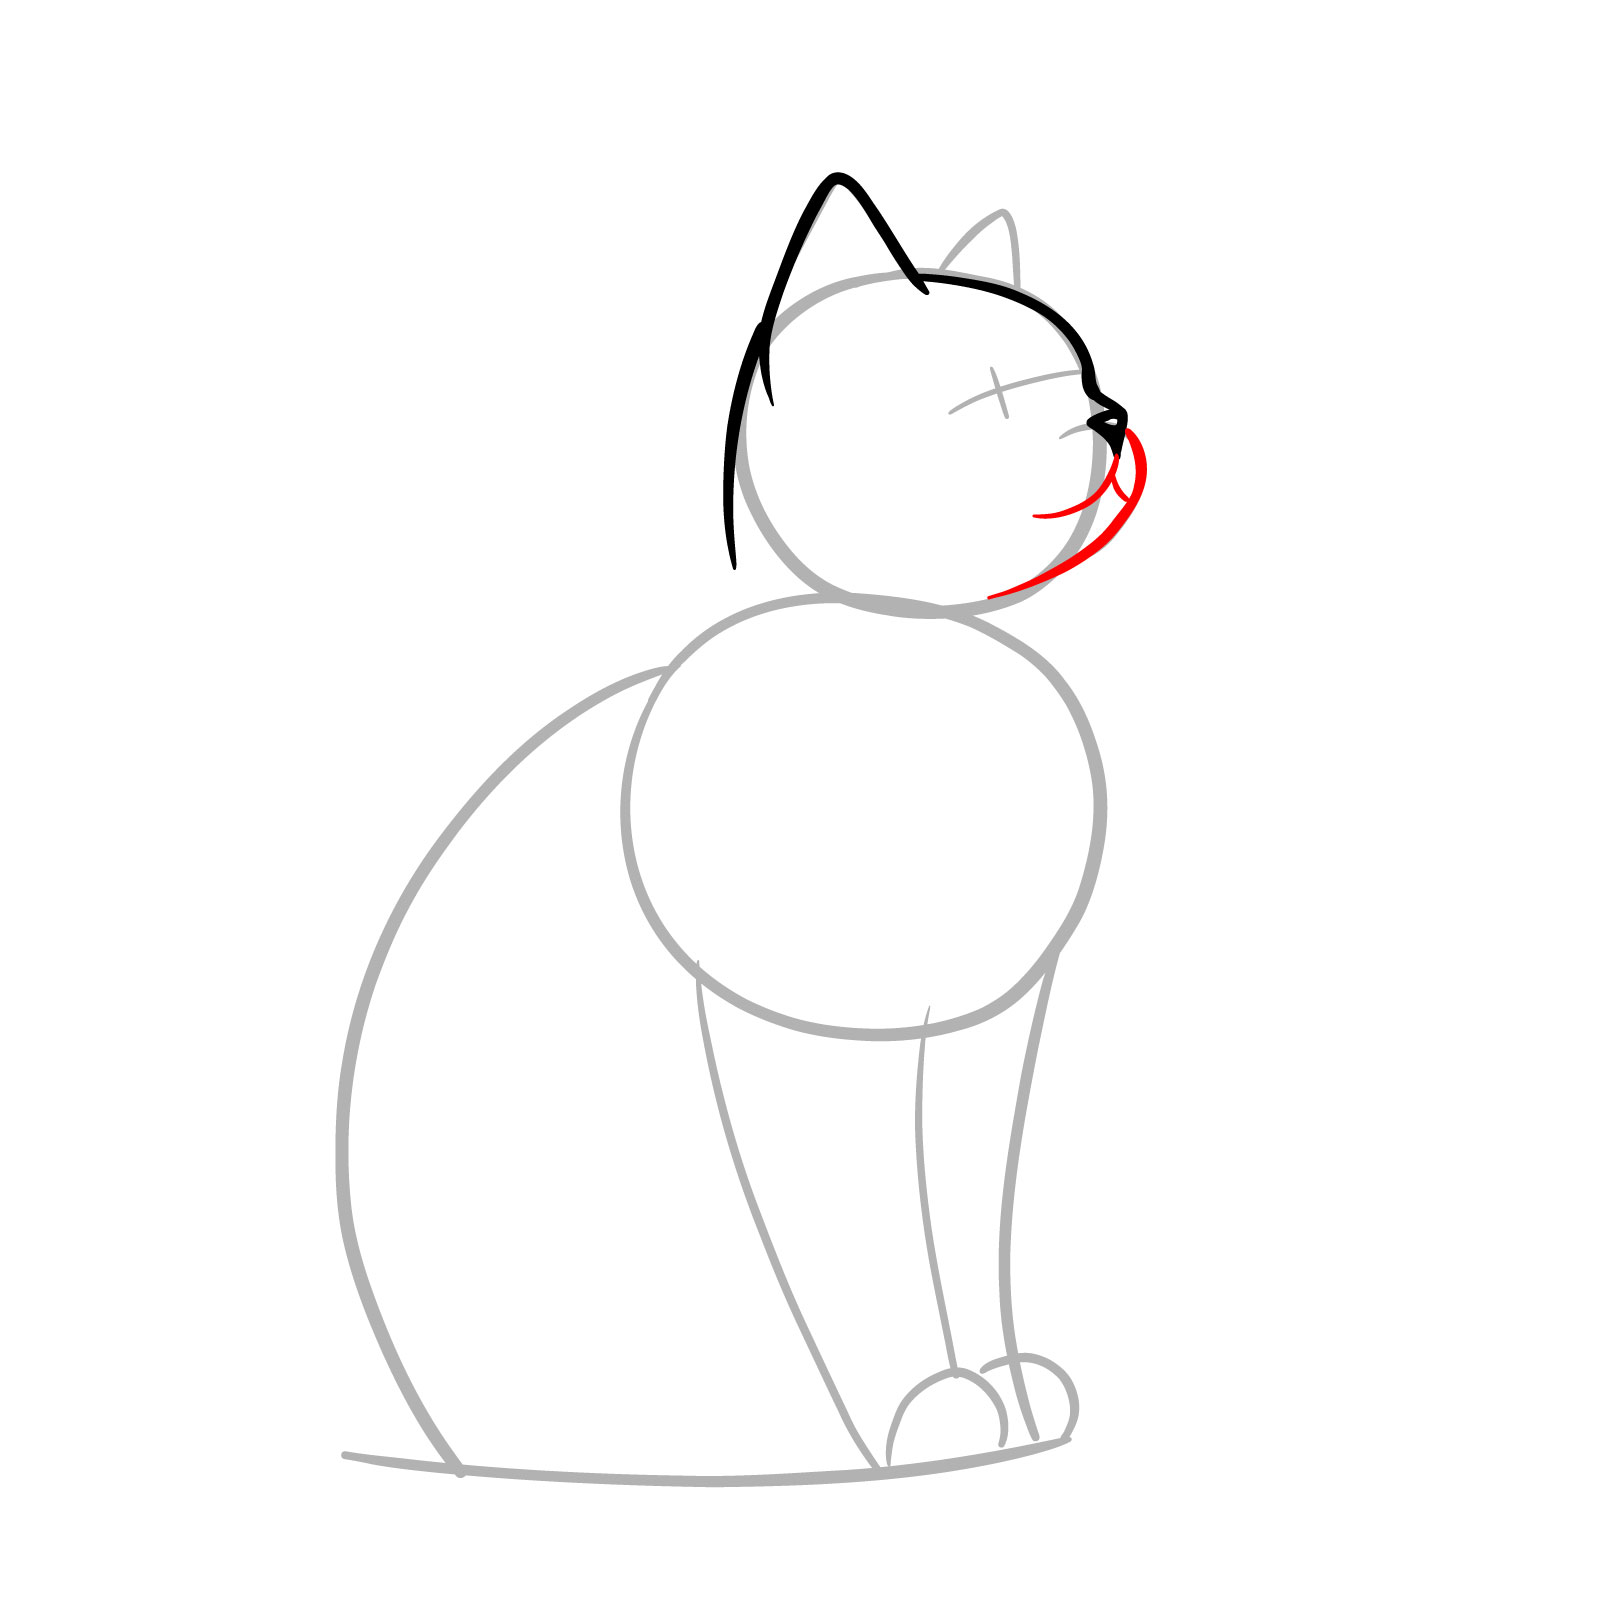 Sketching the cat's mouth and muzzle, finalizing the basic facial features - step 05